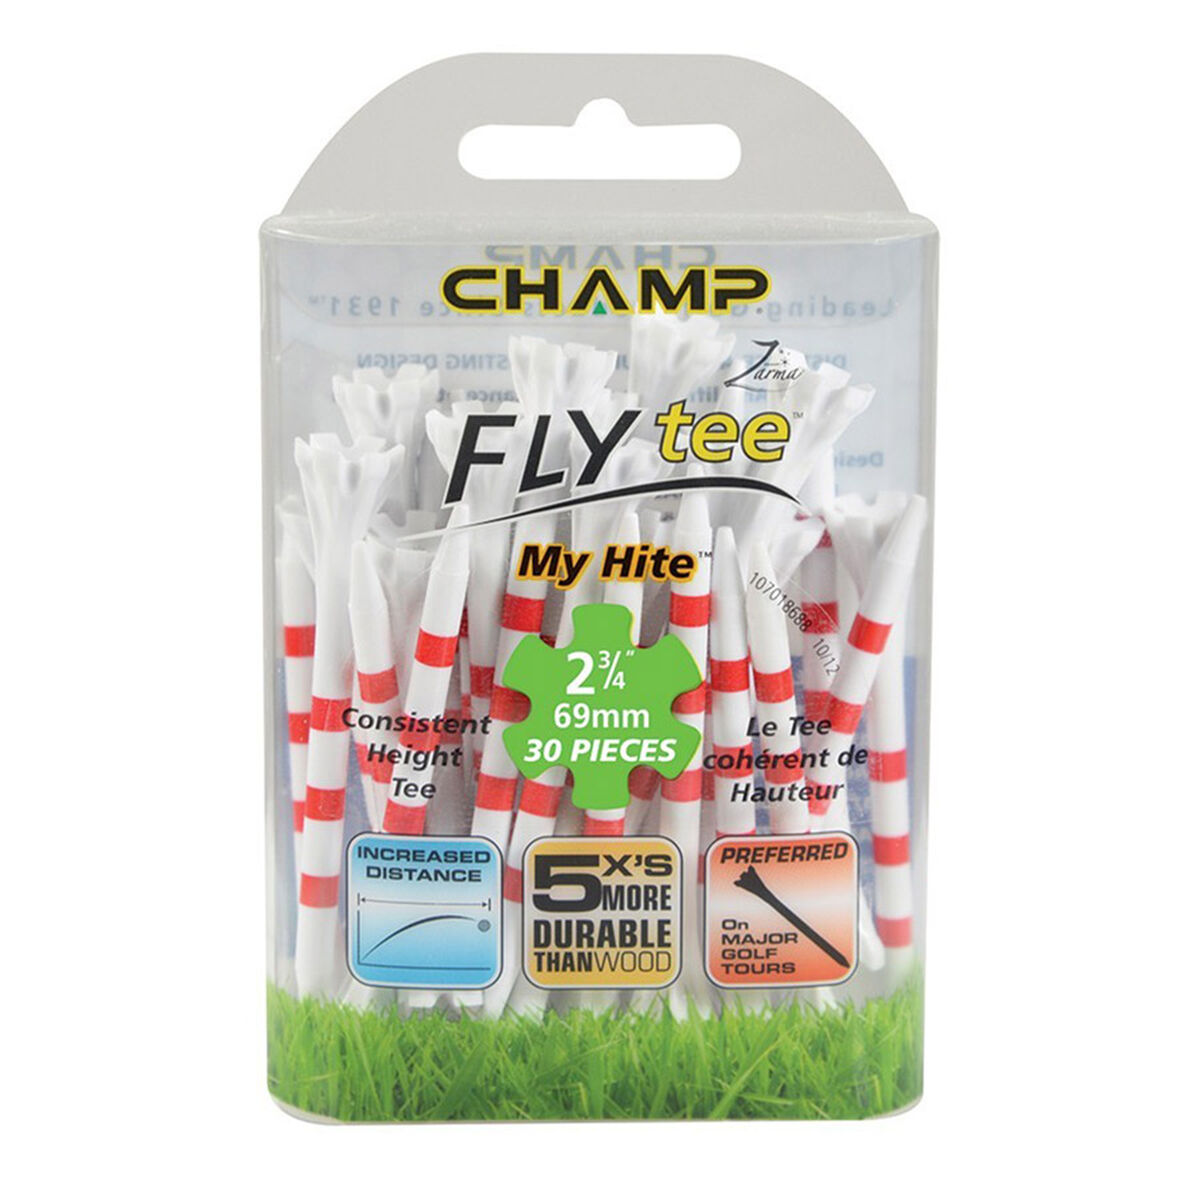 Champ White and Red MyHite Fly Pack of 30 Golf Tees, Size: 69mm | American Golf von CHAMP